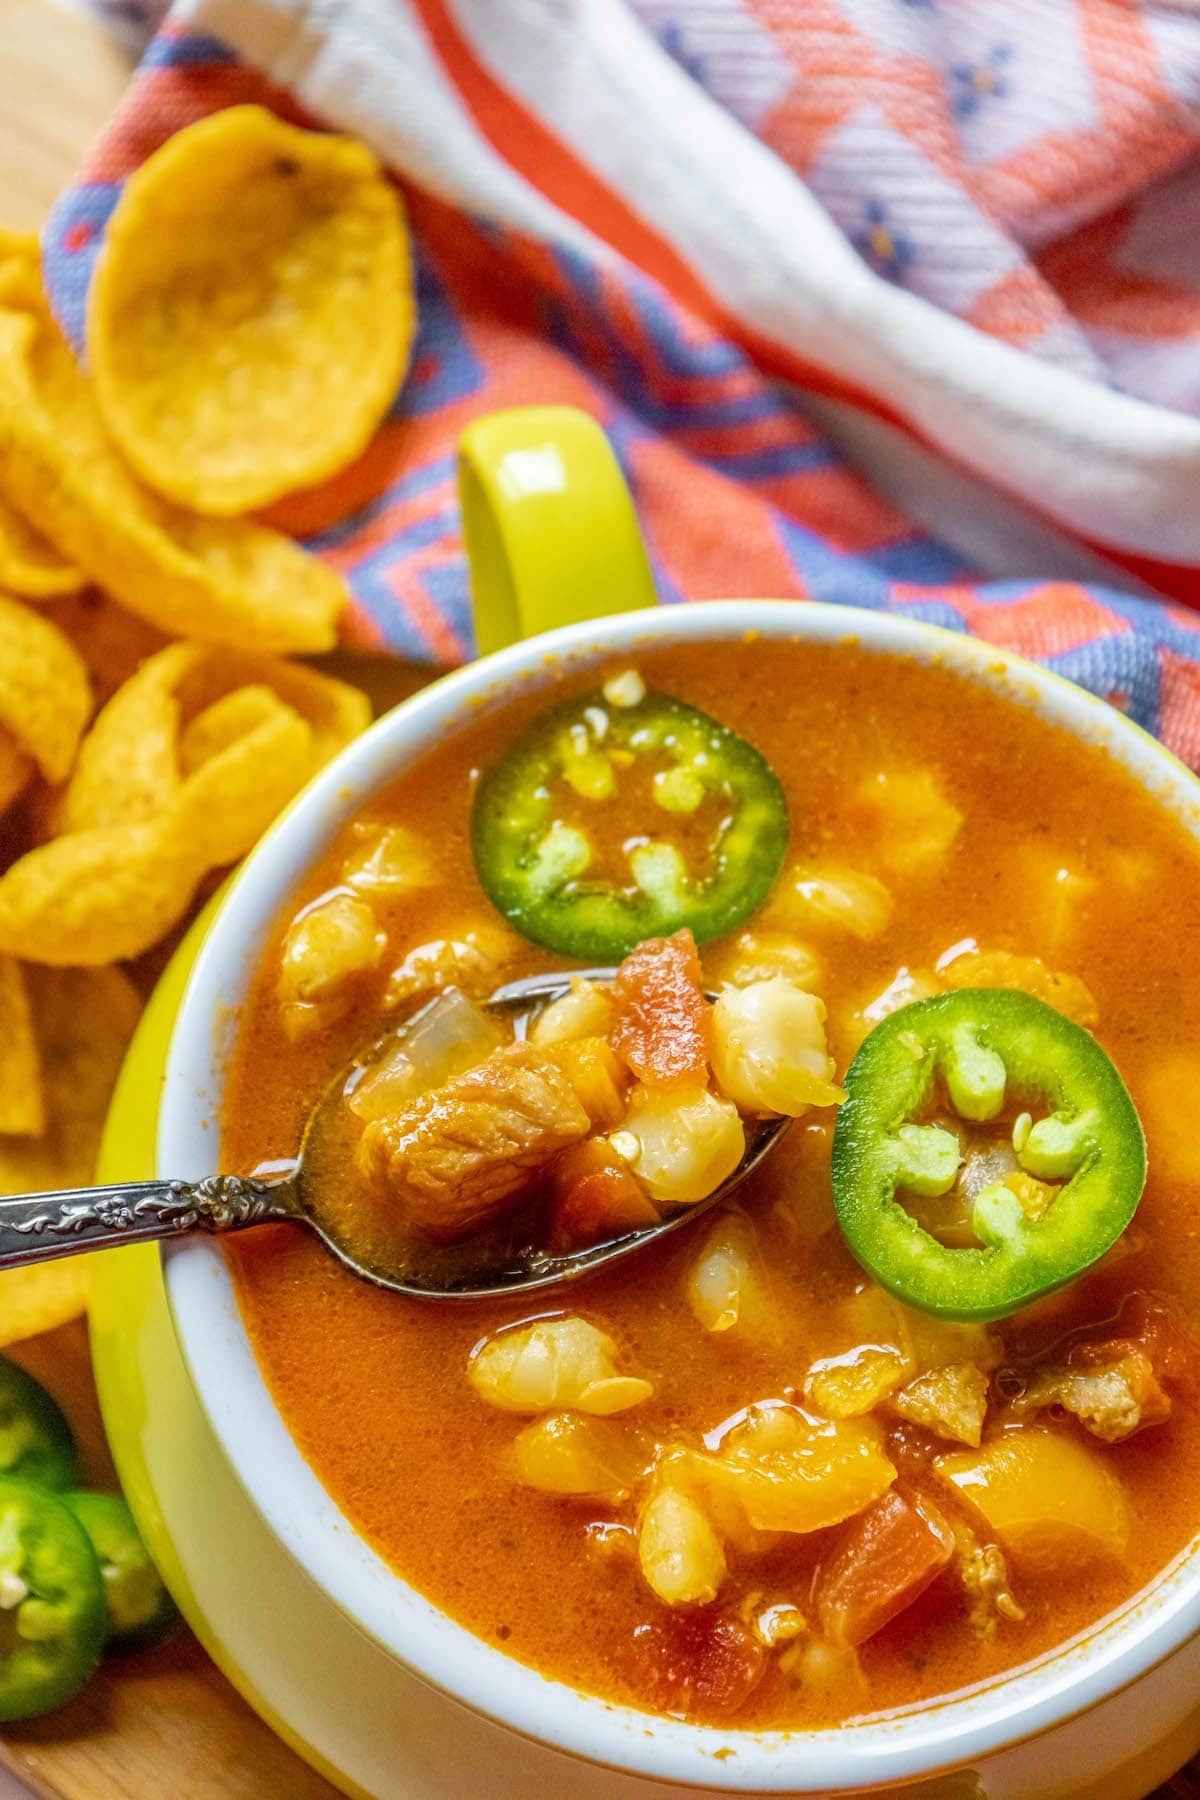 Red posole made with pork shoulder, hominy, and a blend of spices topped with jalapenos in a bowl